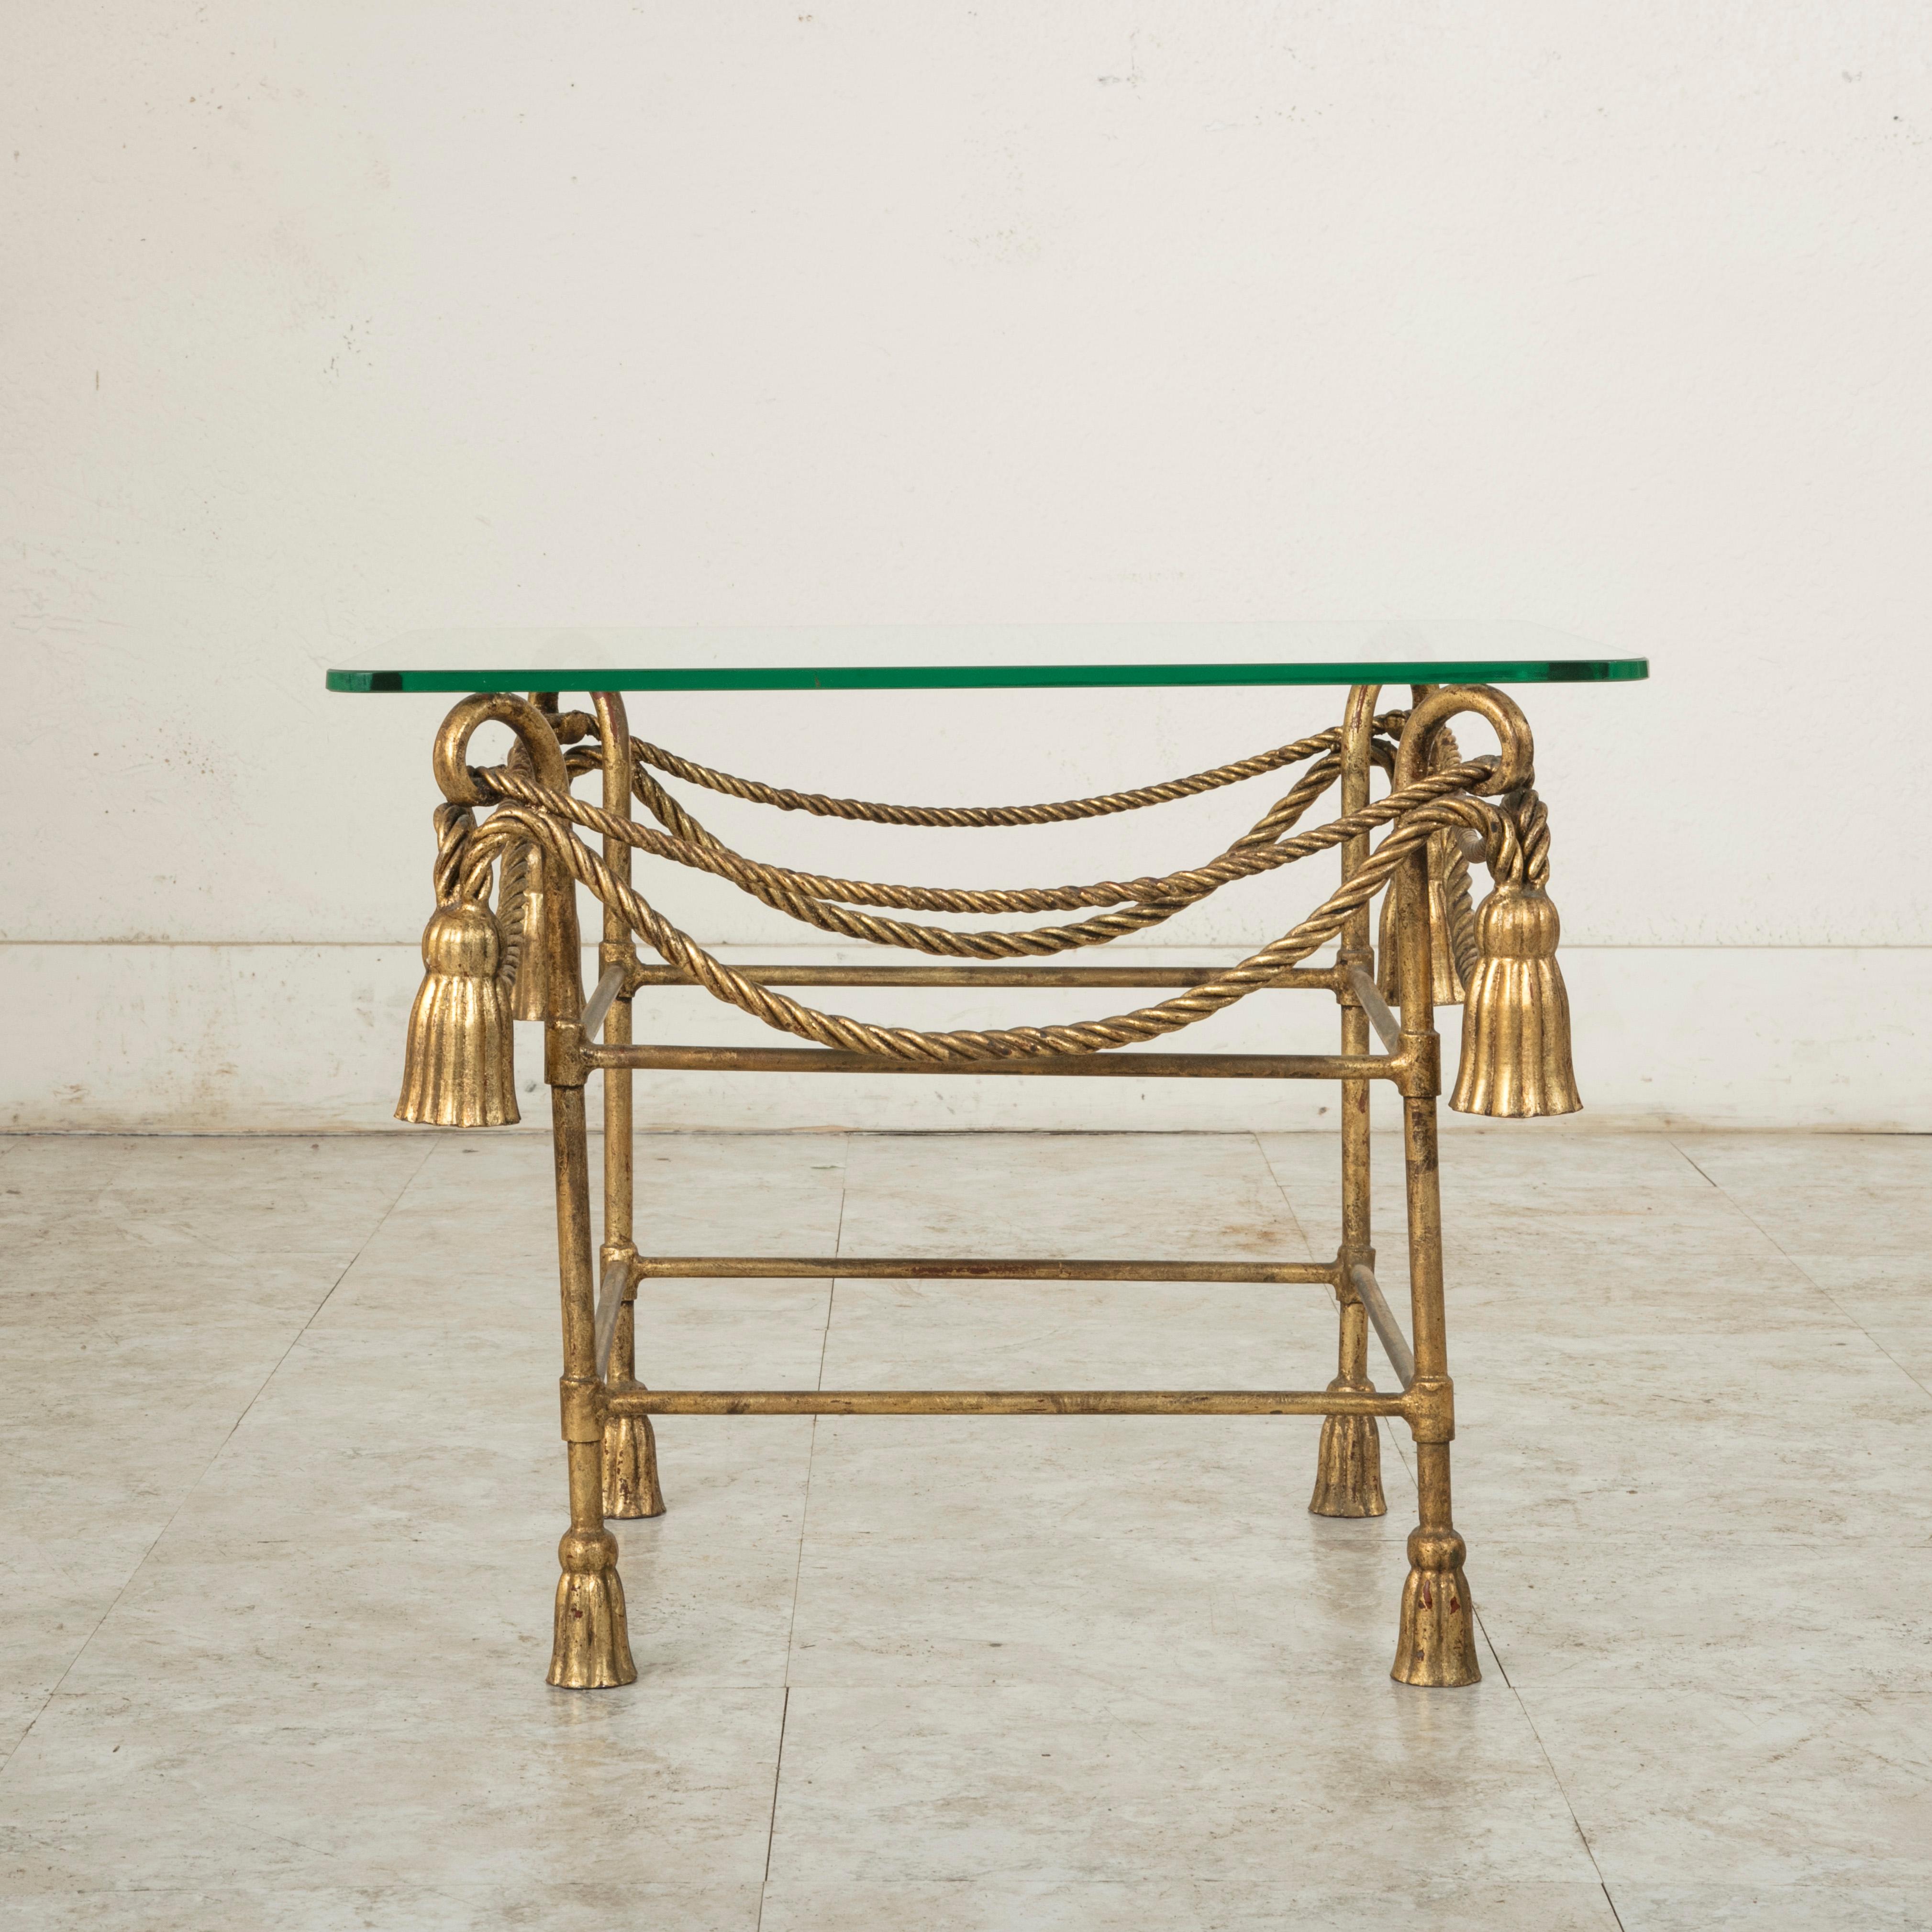 20th Century Midcentury French Jean-Charles Moreux Gilt Iron and Glass Side Table, End Table